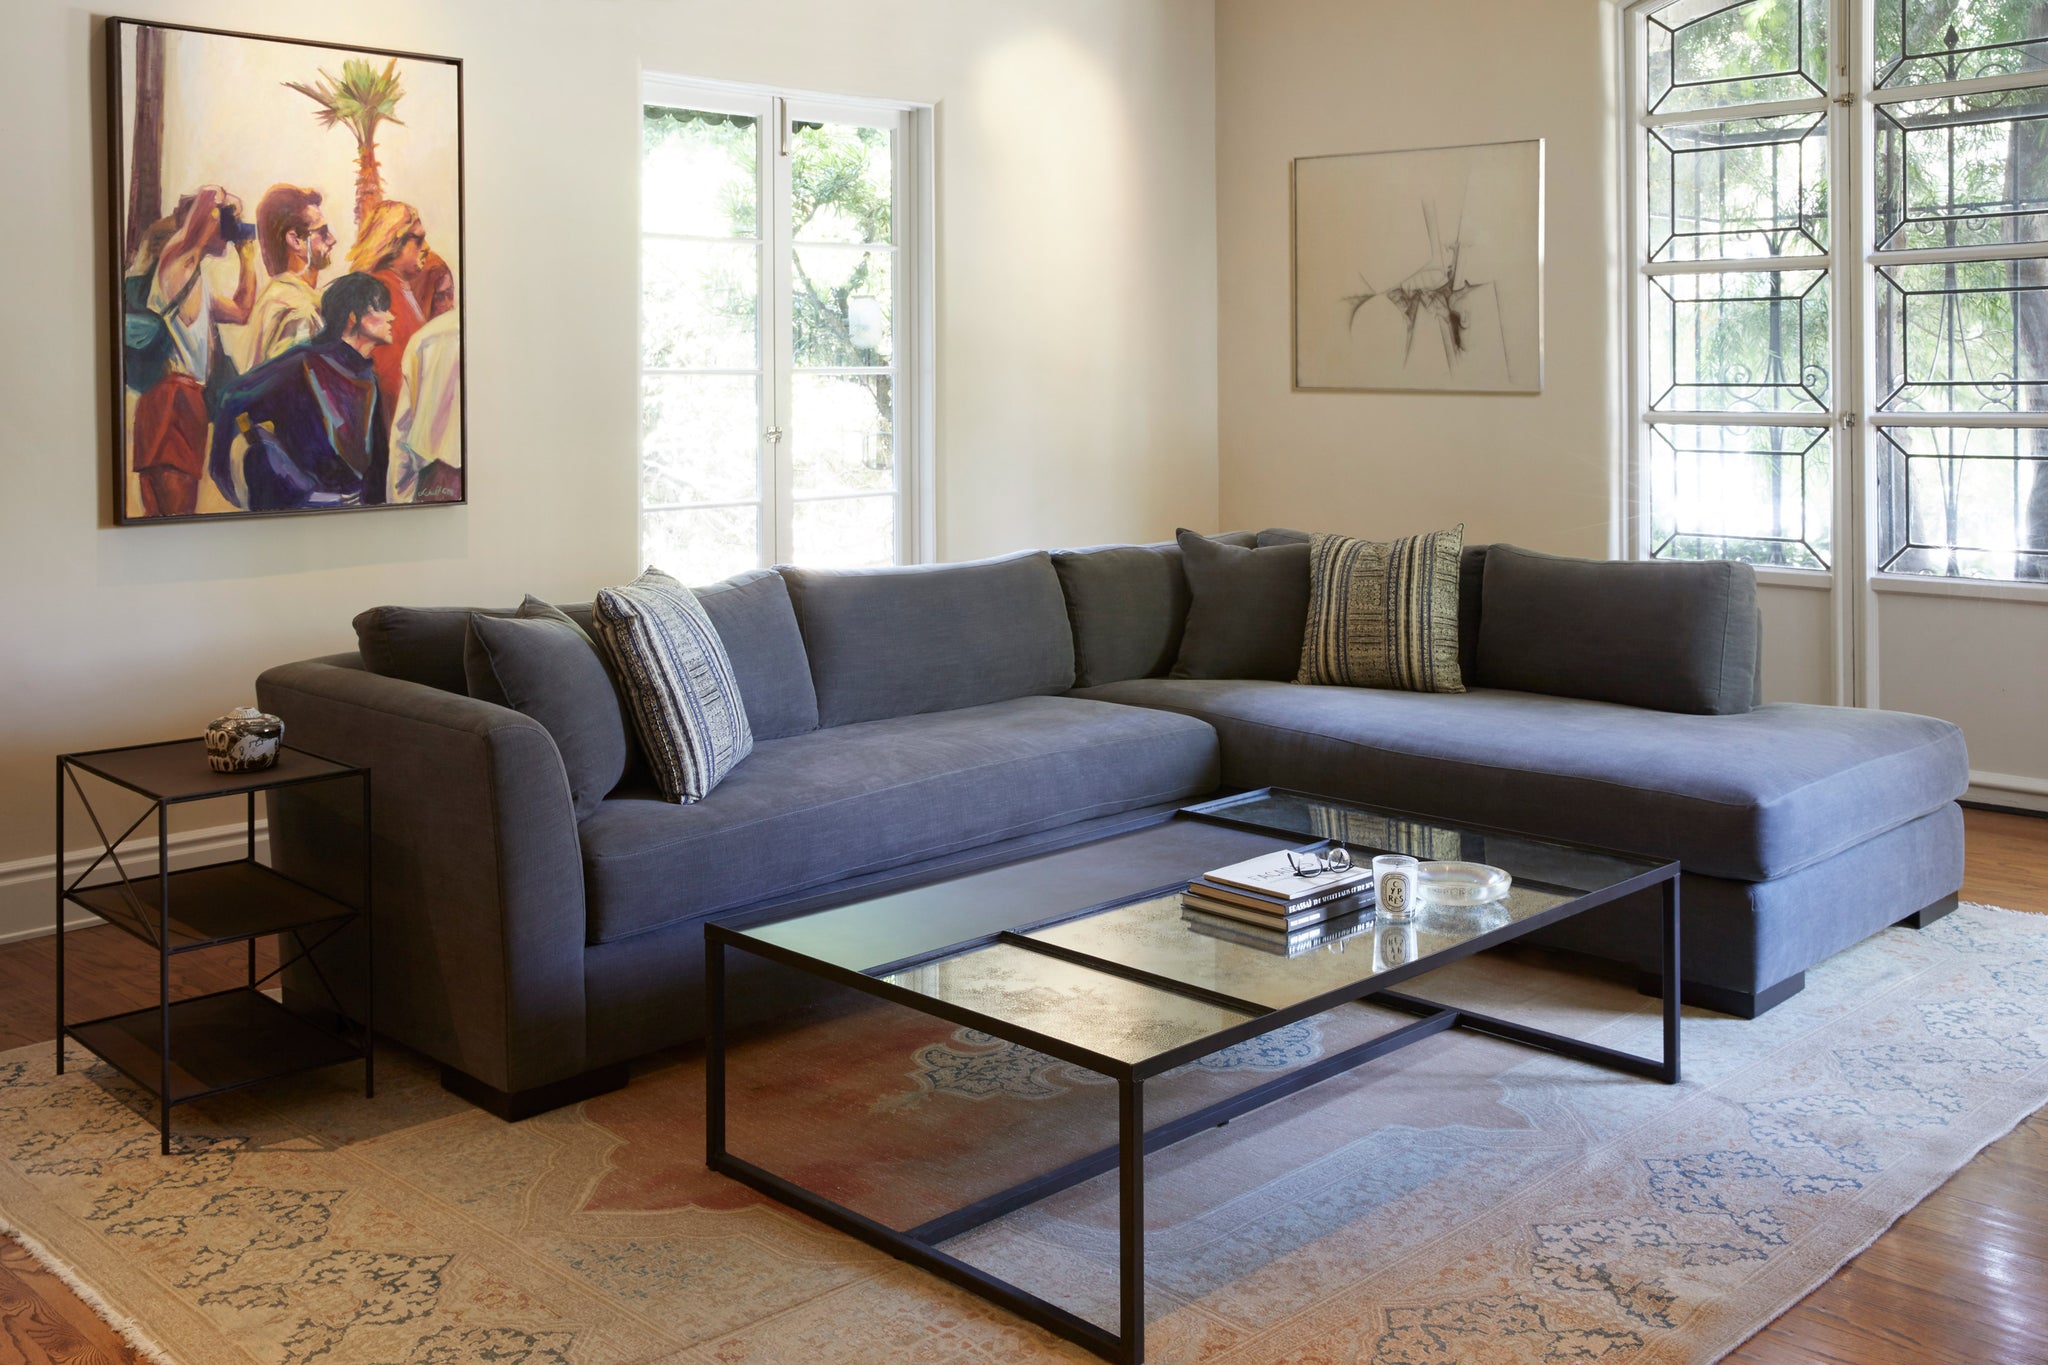  Ryder Sectional in Molino Slate next to a glass coffee table and a metal side table. Underneath the sectional we see a beige rug. Photographed in Molino Slate. 